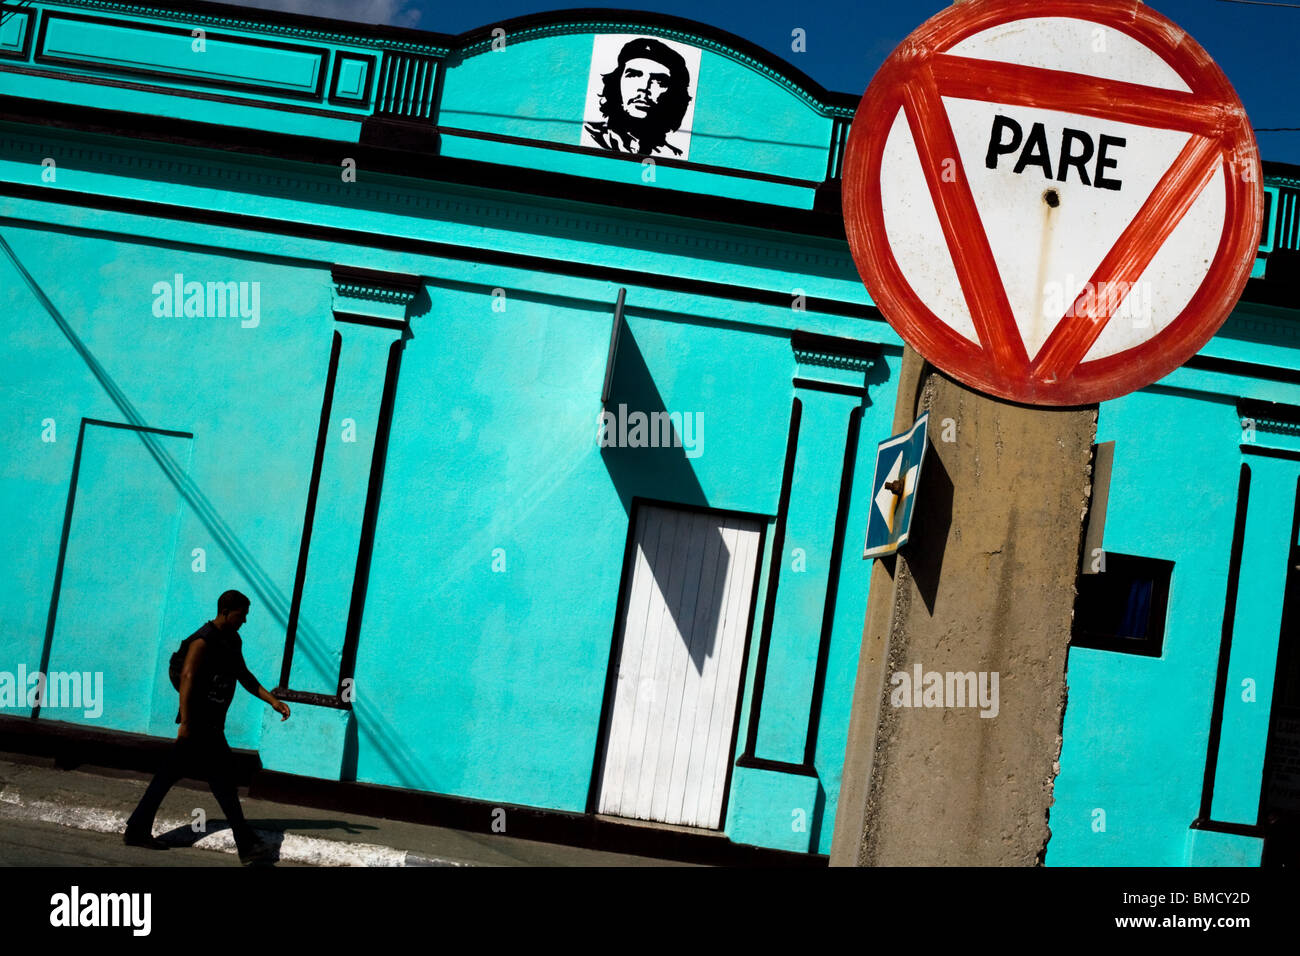 A man walks by a bright blue building adorned with an image of Ernesto Che Guevara in Baracoa, Cuba on Monday July 14, 2008. Stock Photo